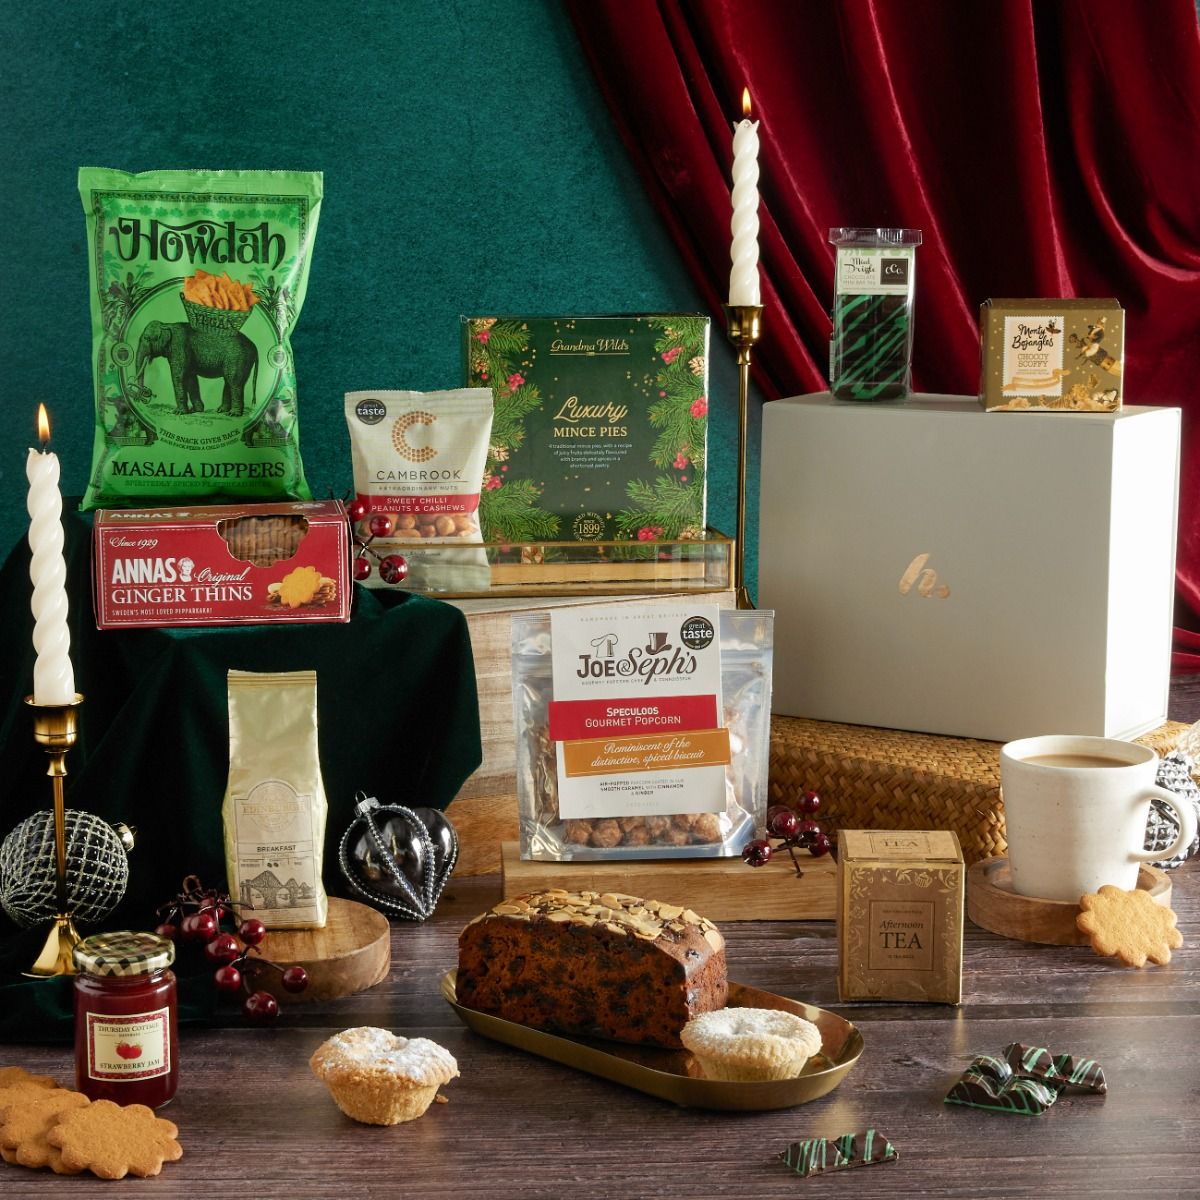 The Bearing Gifts Christmas Hamper with contents on display